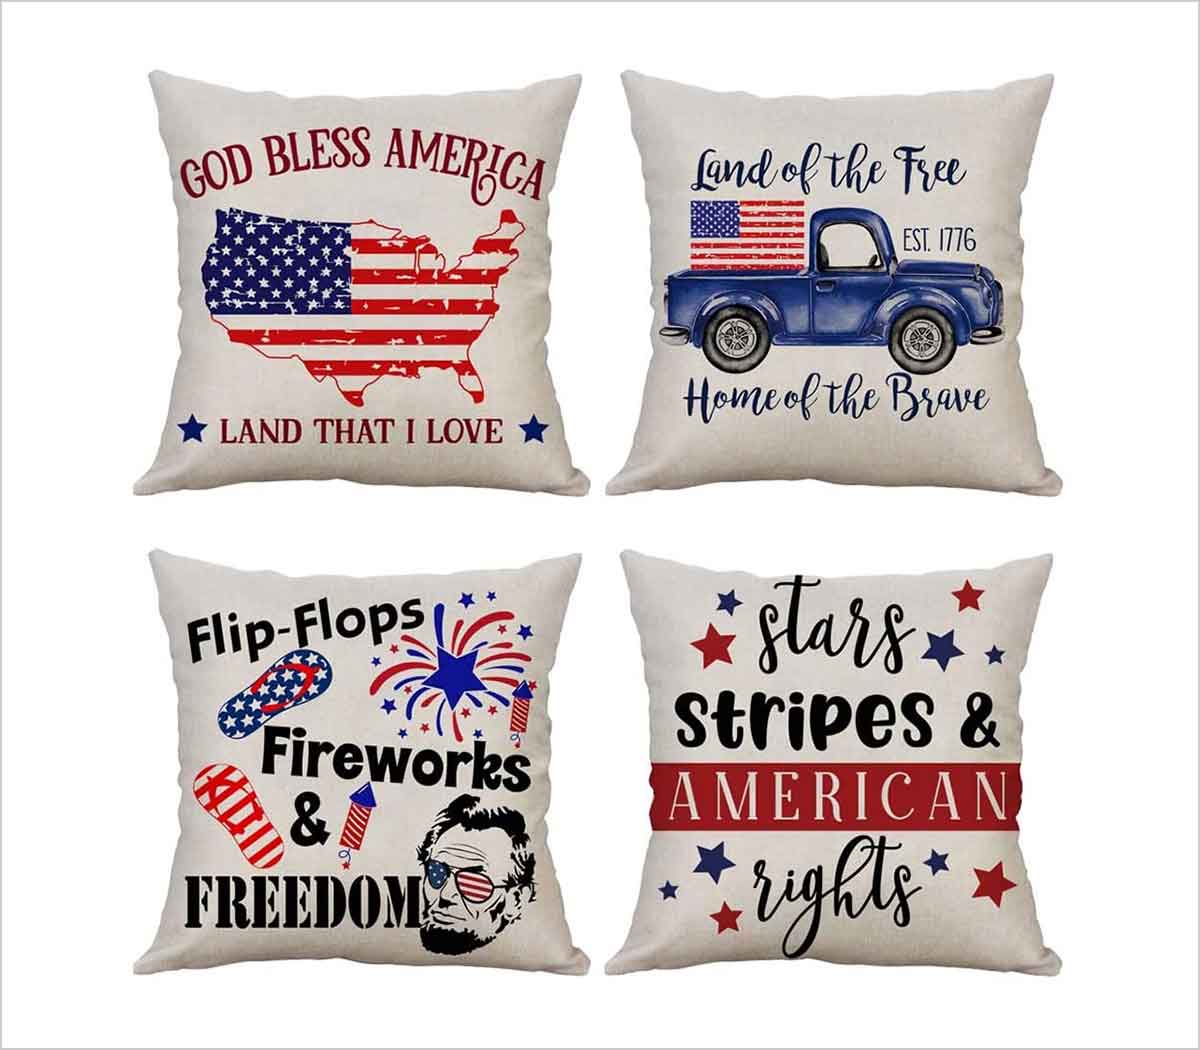 FELENIW Retro Wooden American Flag Home Sweet Home Happy American Independence Day Lover Cotton Linen Decorative Throw Pillow Cover Cushion Case Lumbar 12x20 inches